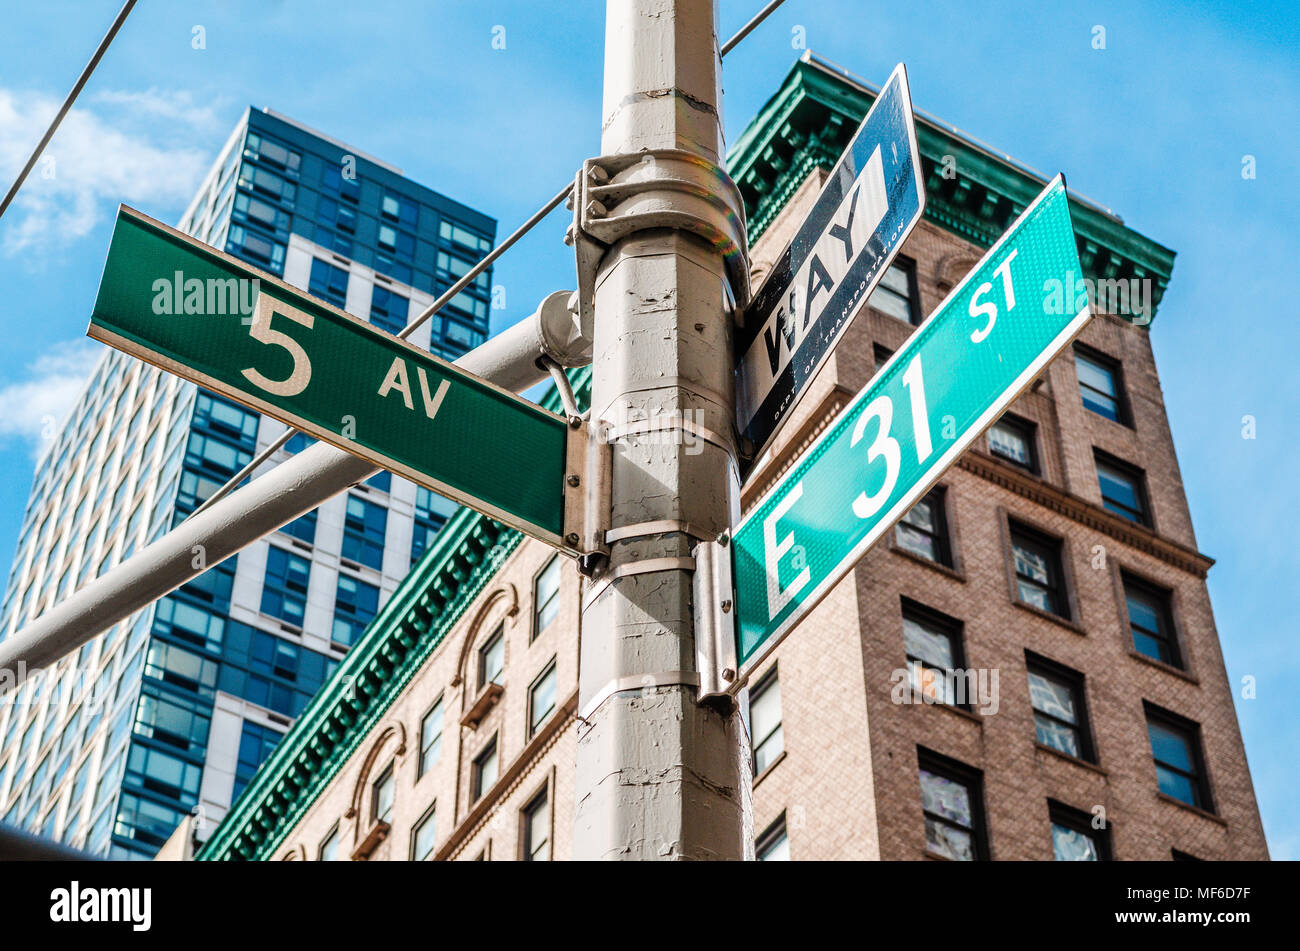 5th Avenue (Ave) Sign, New York NYC Stock Photo